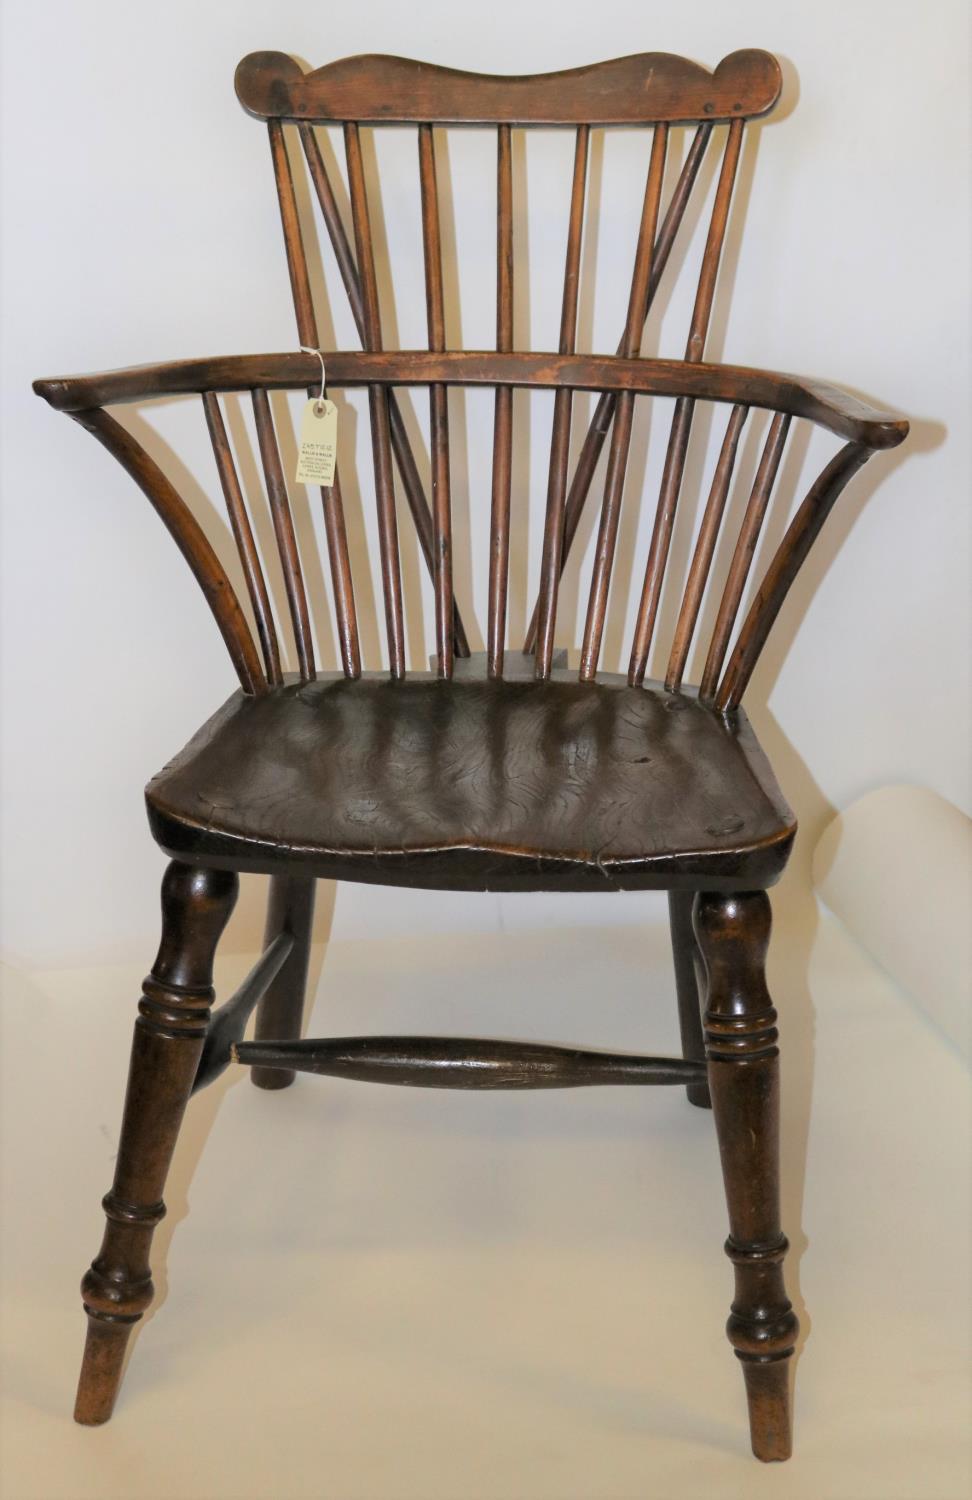 A 19th century comb back windsor chair in elm/yew. GC. £30-50